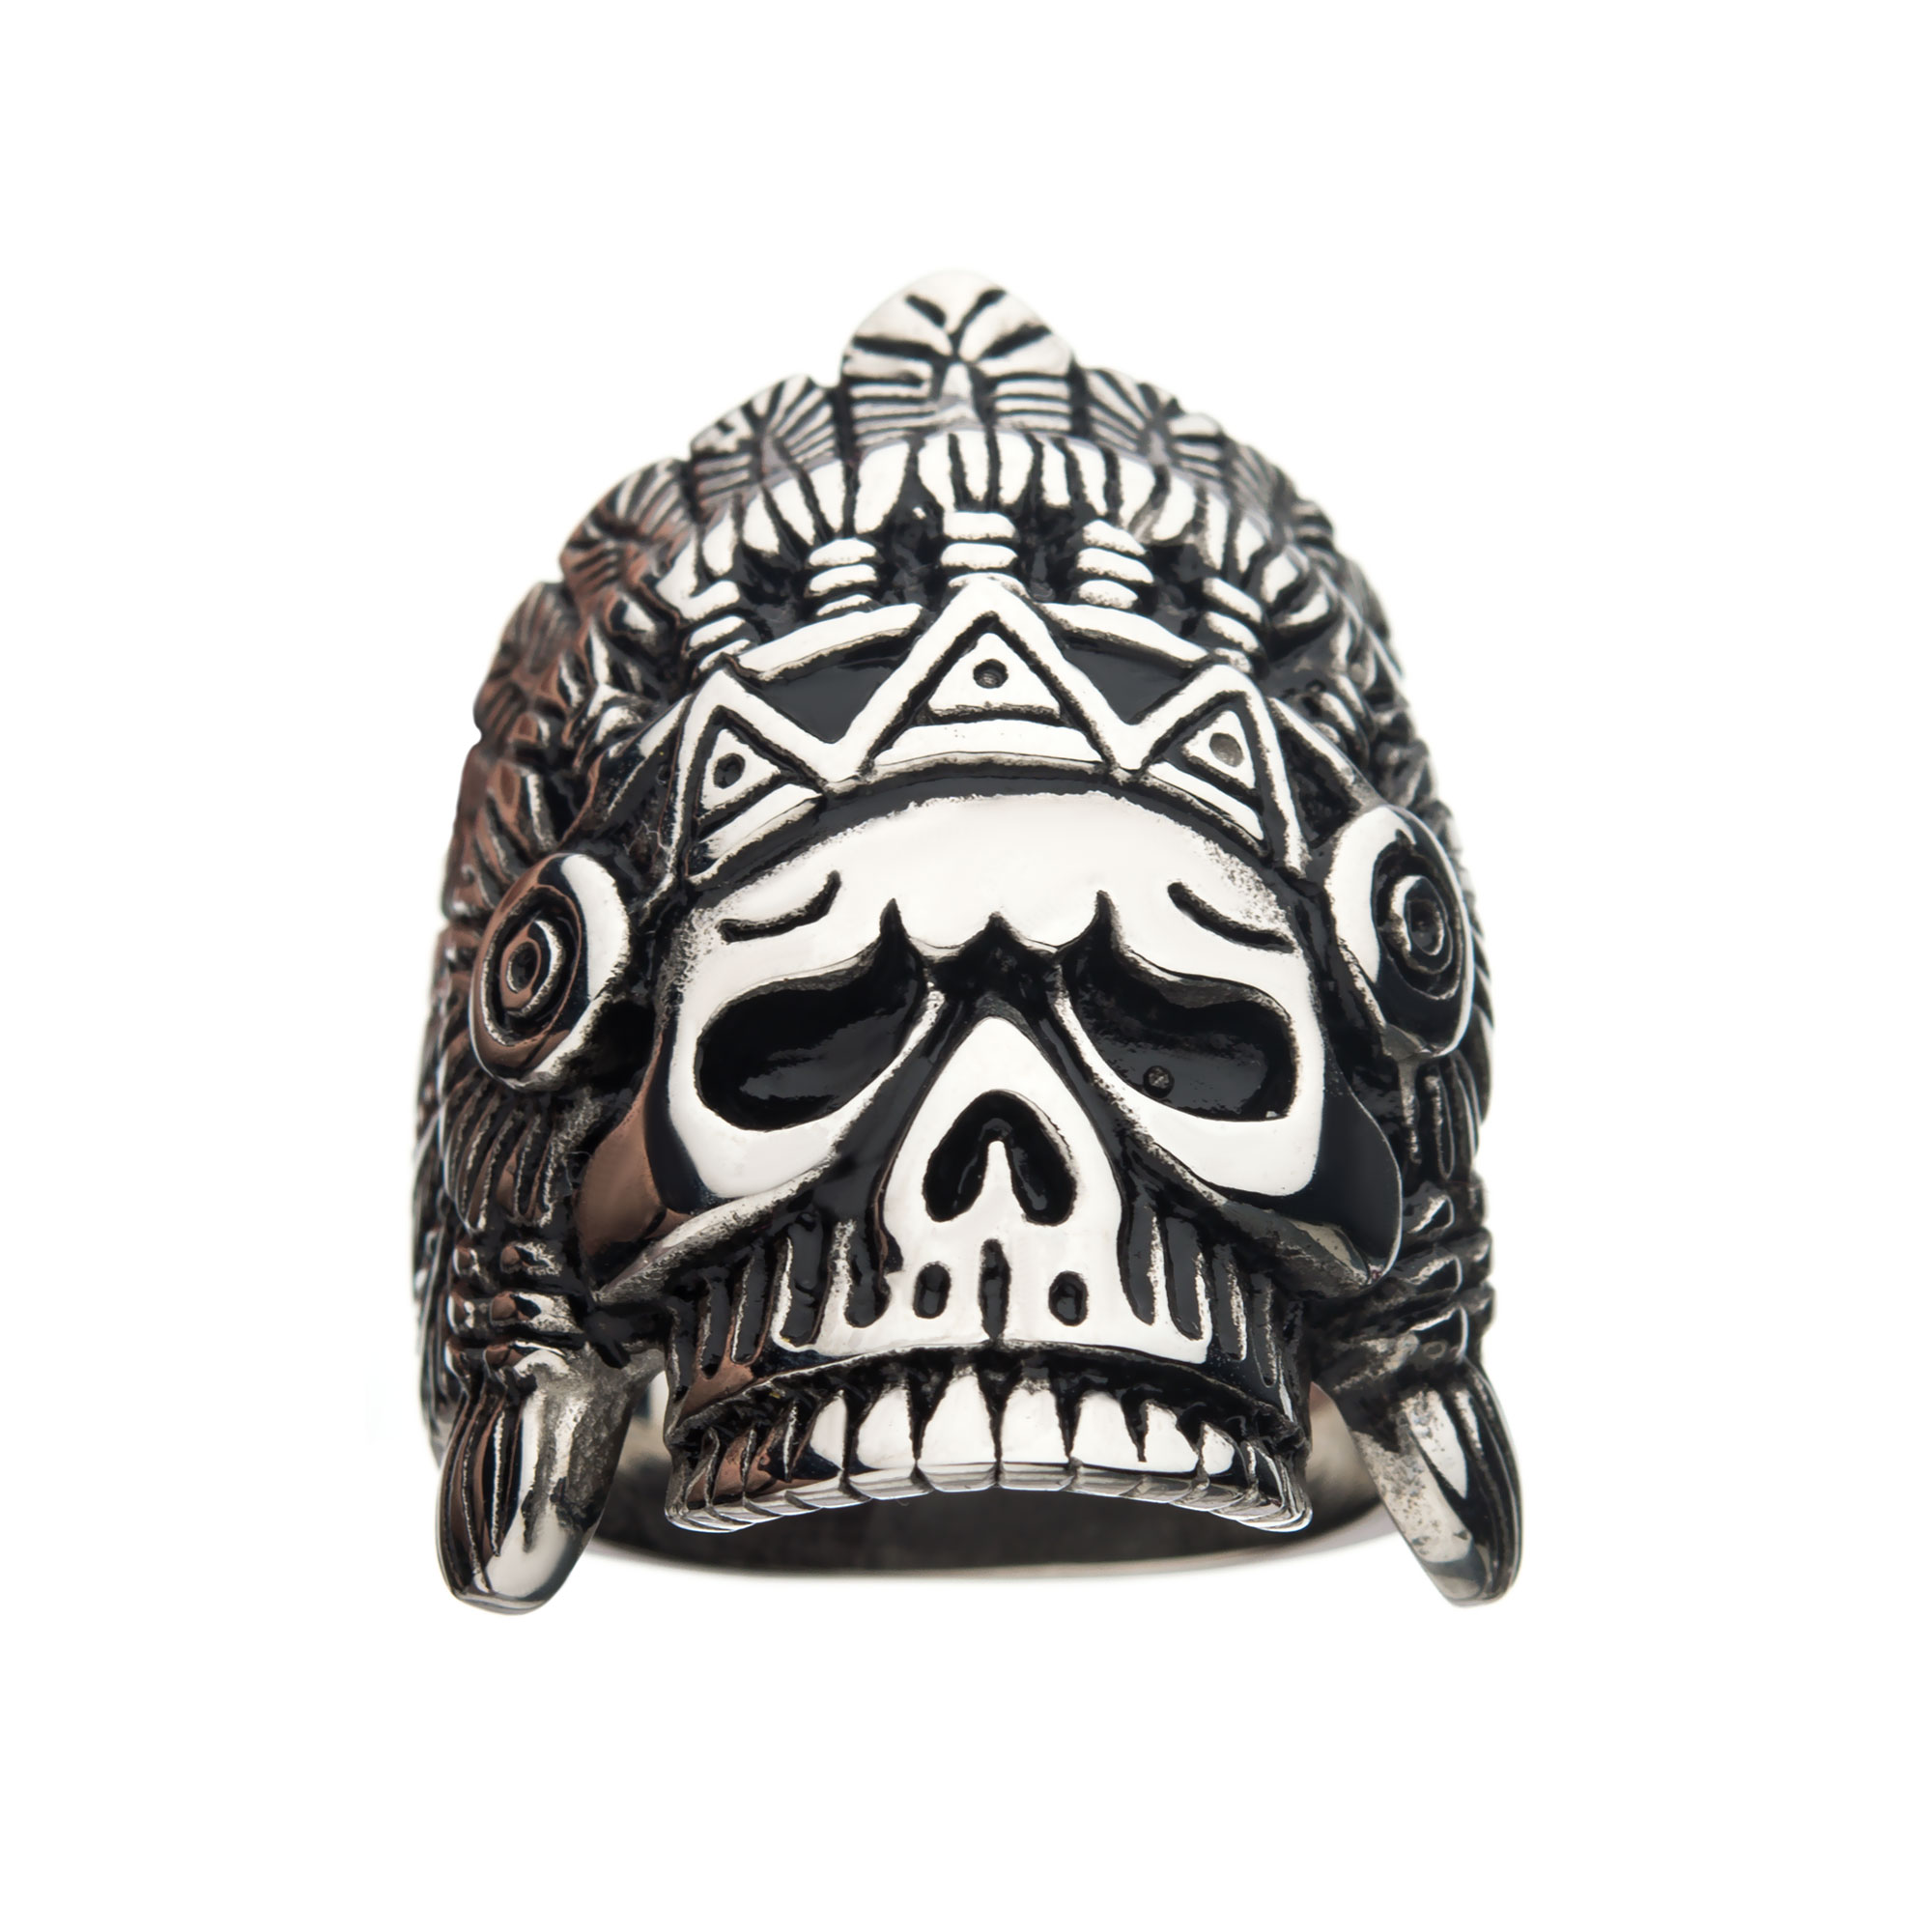 Oxidized Stainless Steel Chief Skull Ring Image 2 Spath Jewelers Bartow, FL